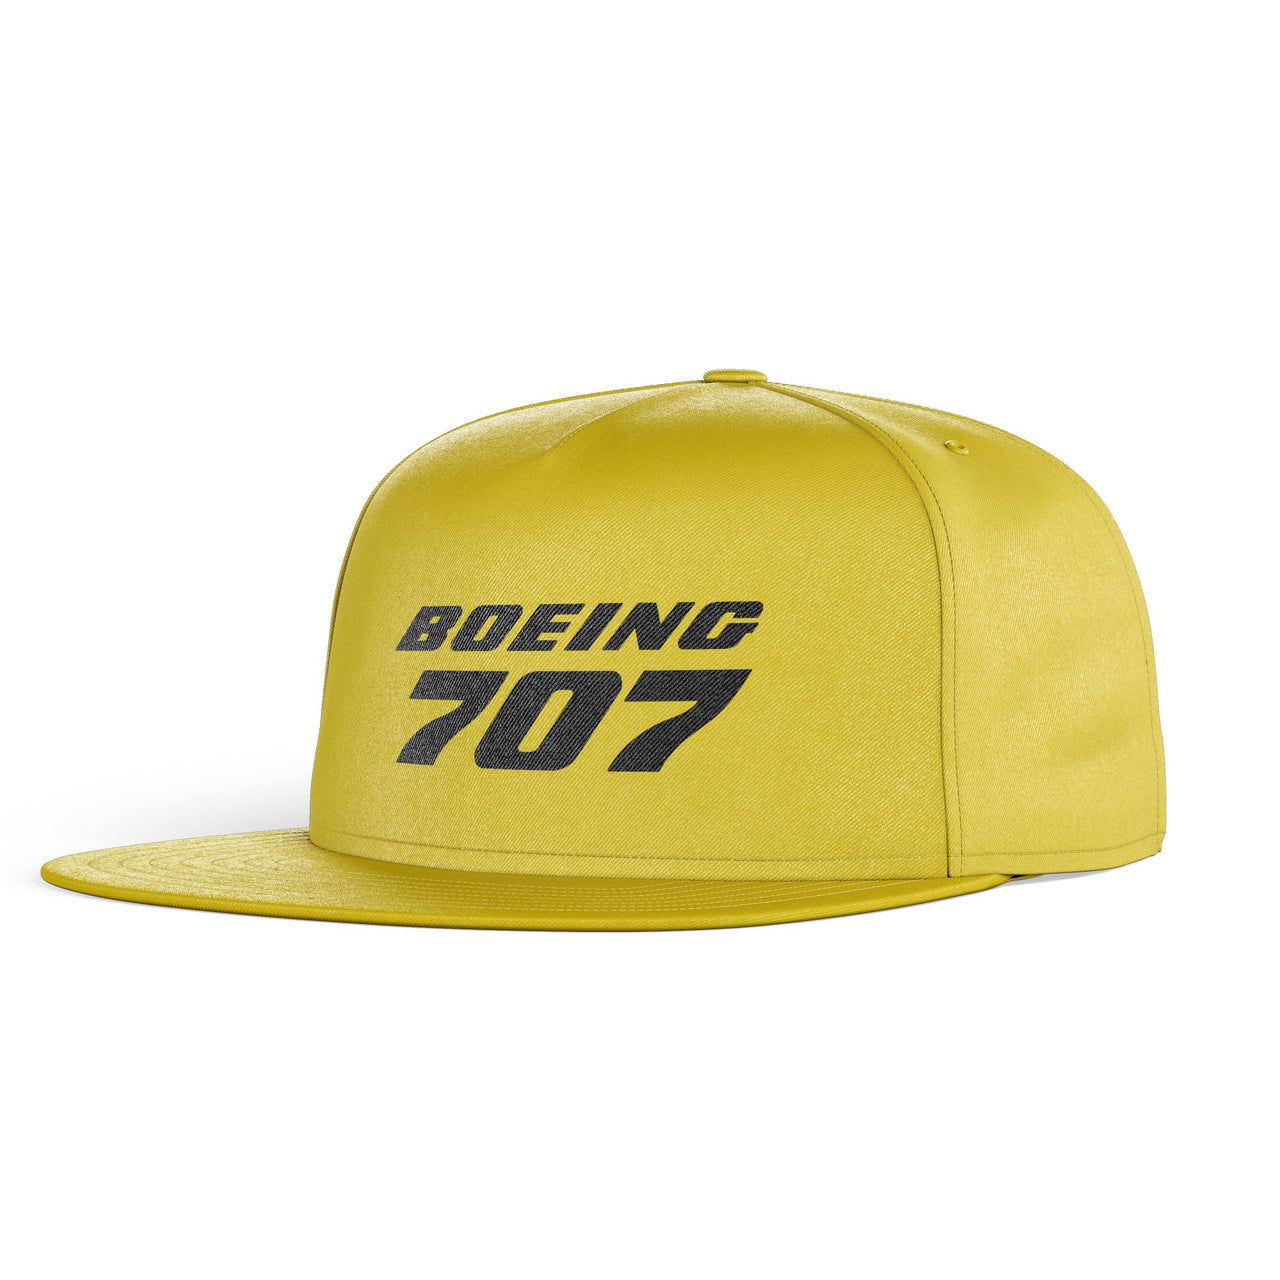 Boeing 707 & Text Designed Snapback Caps & Hats